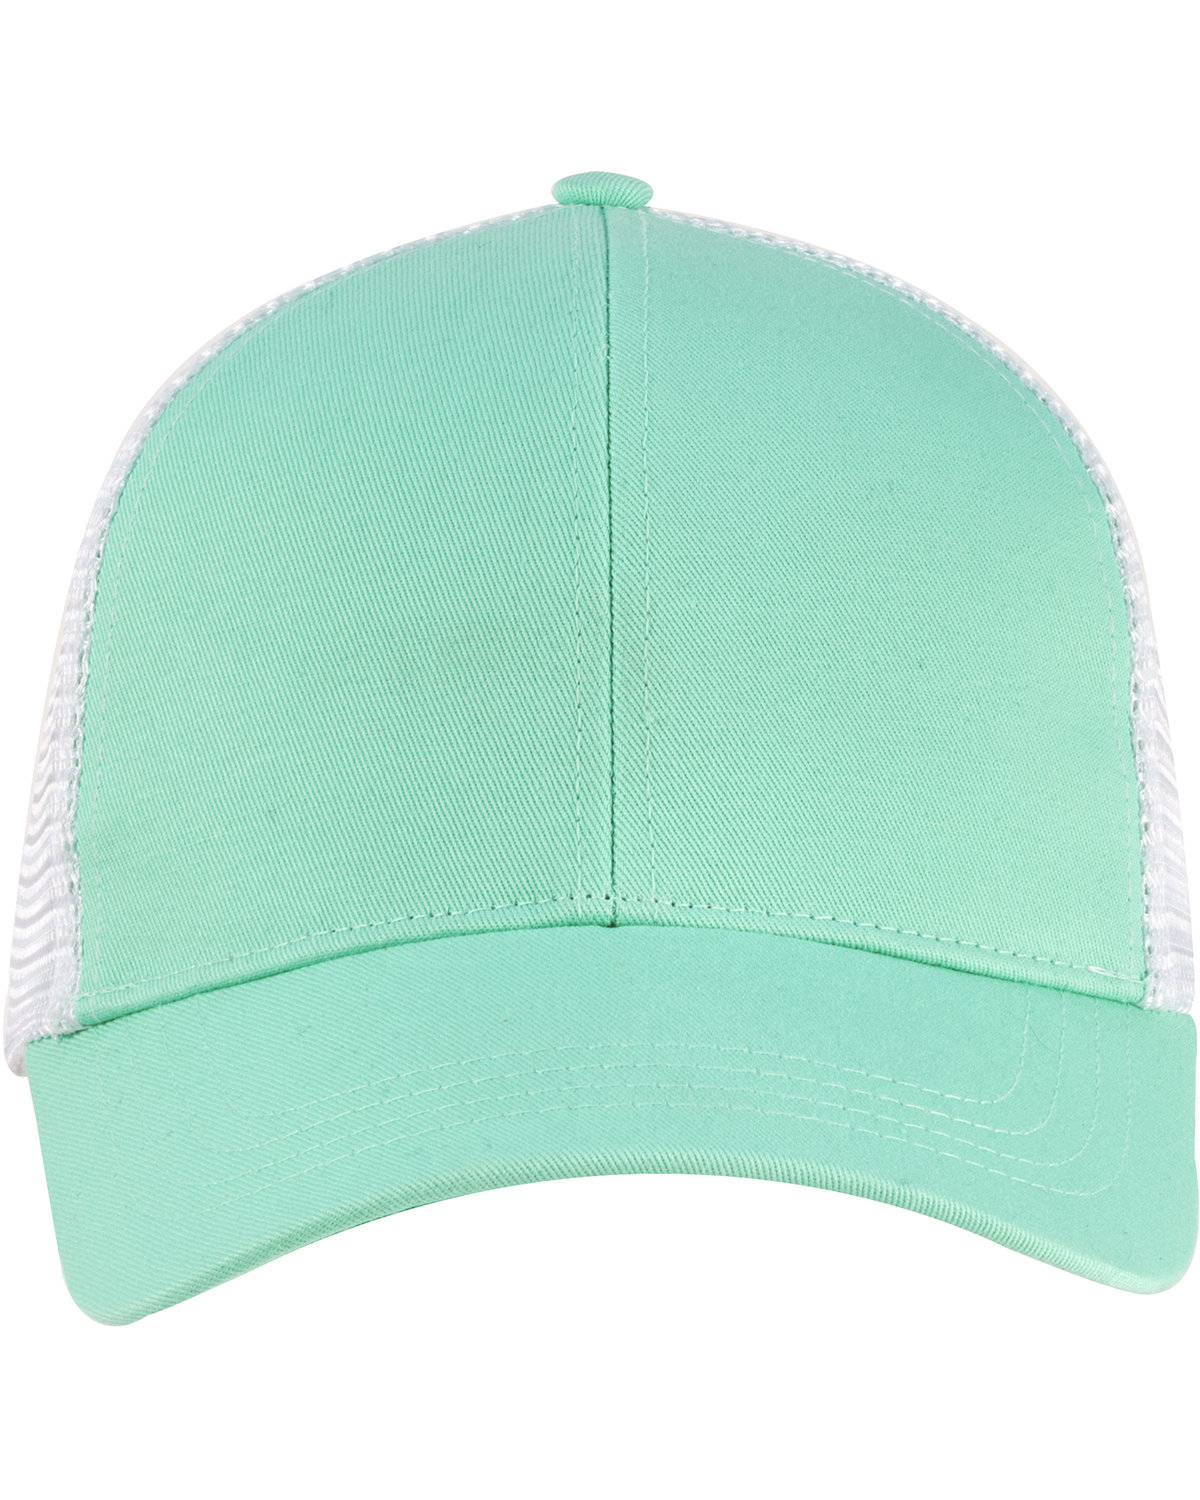 econscious Eco Trucker Organic/Recycled Hat MINT/ WHITE 